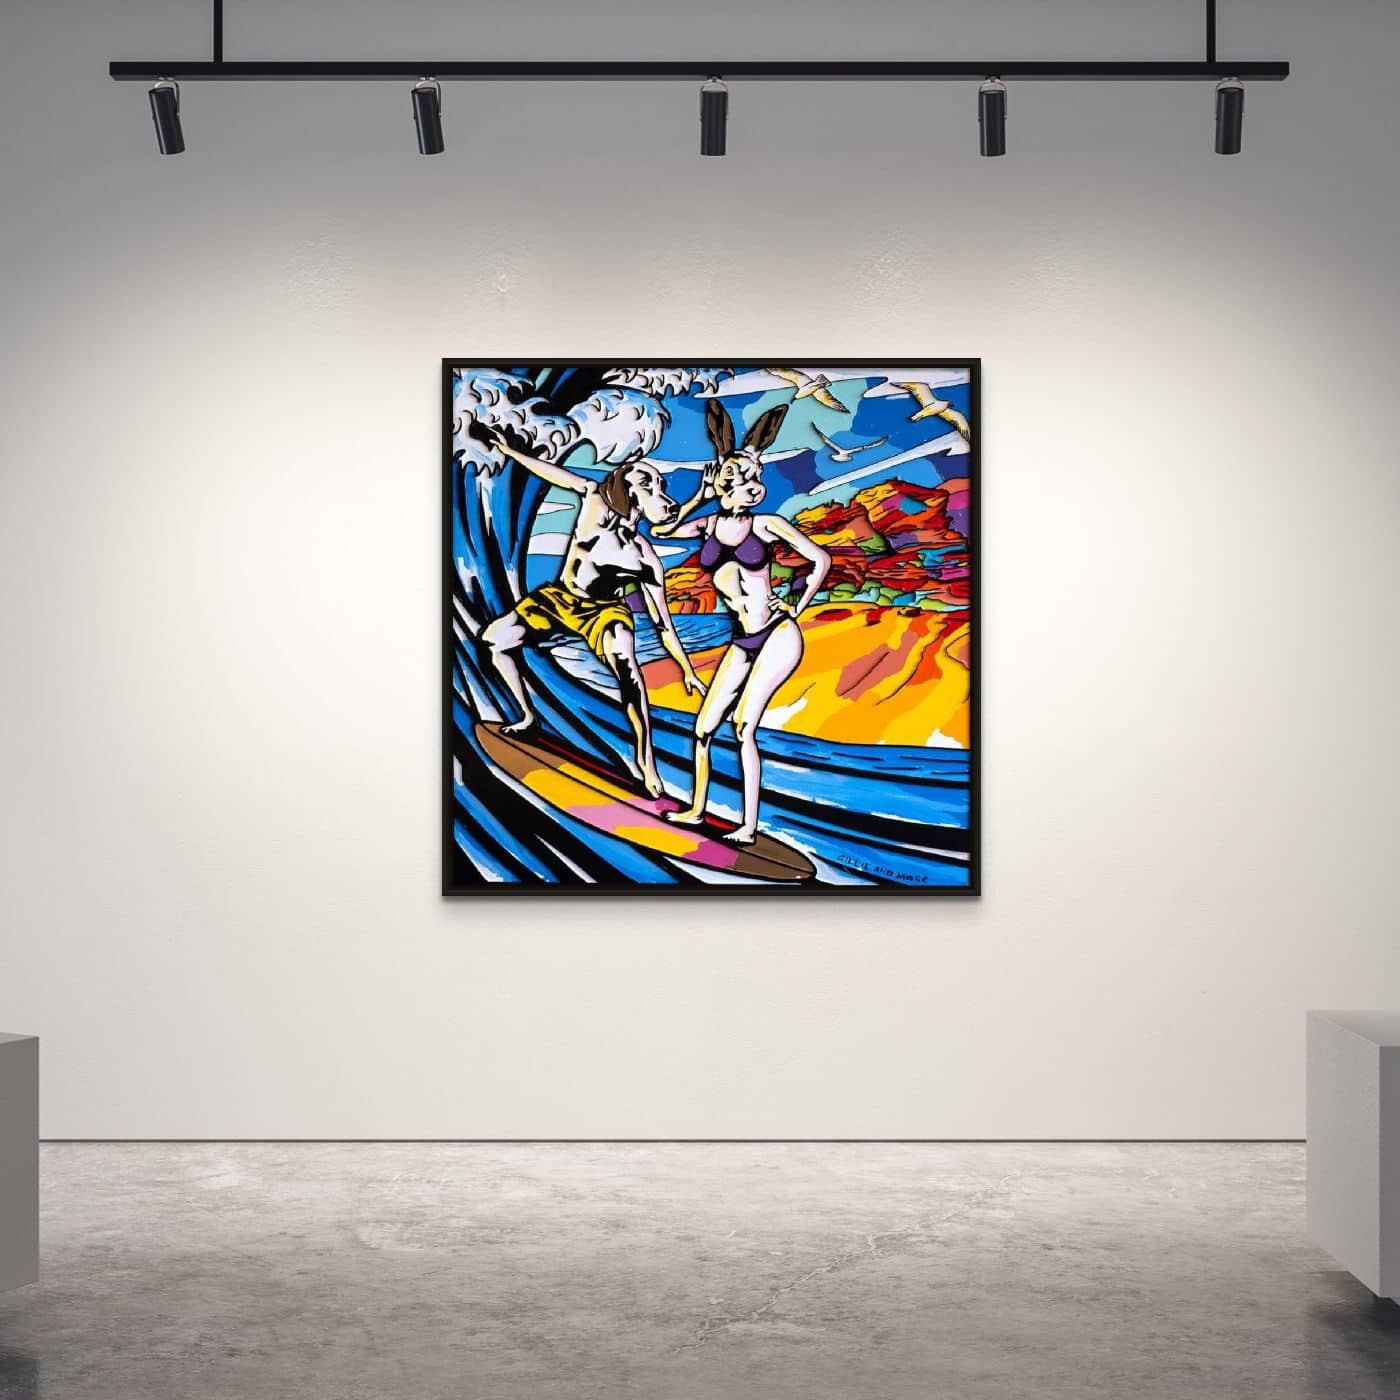 Australian Artistic Duo Gillie and Marc Painting ~ 'They Lived for the Ride' - Curate Art & Design Gallery Sorrento Mornington Peninsula Melbourne